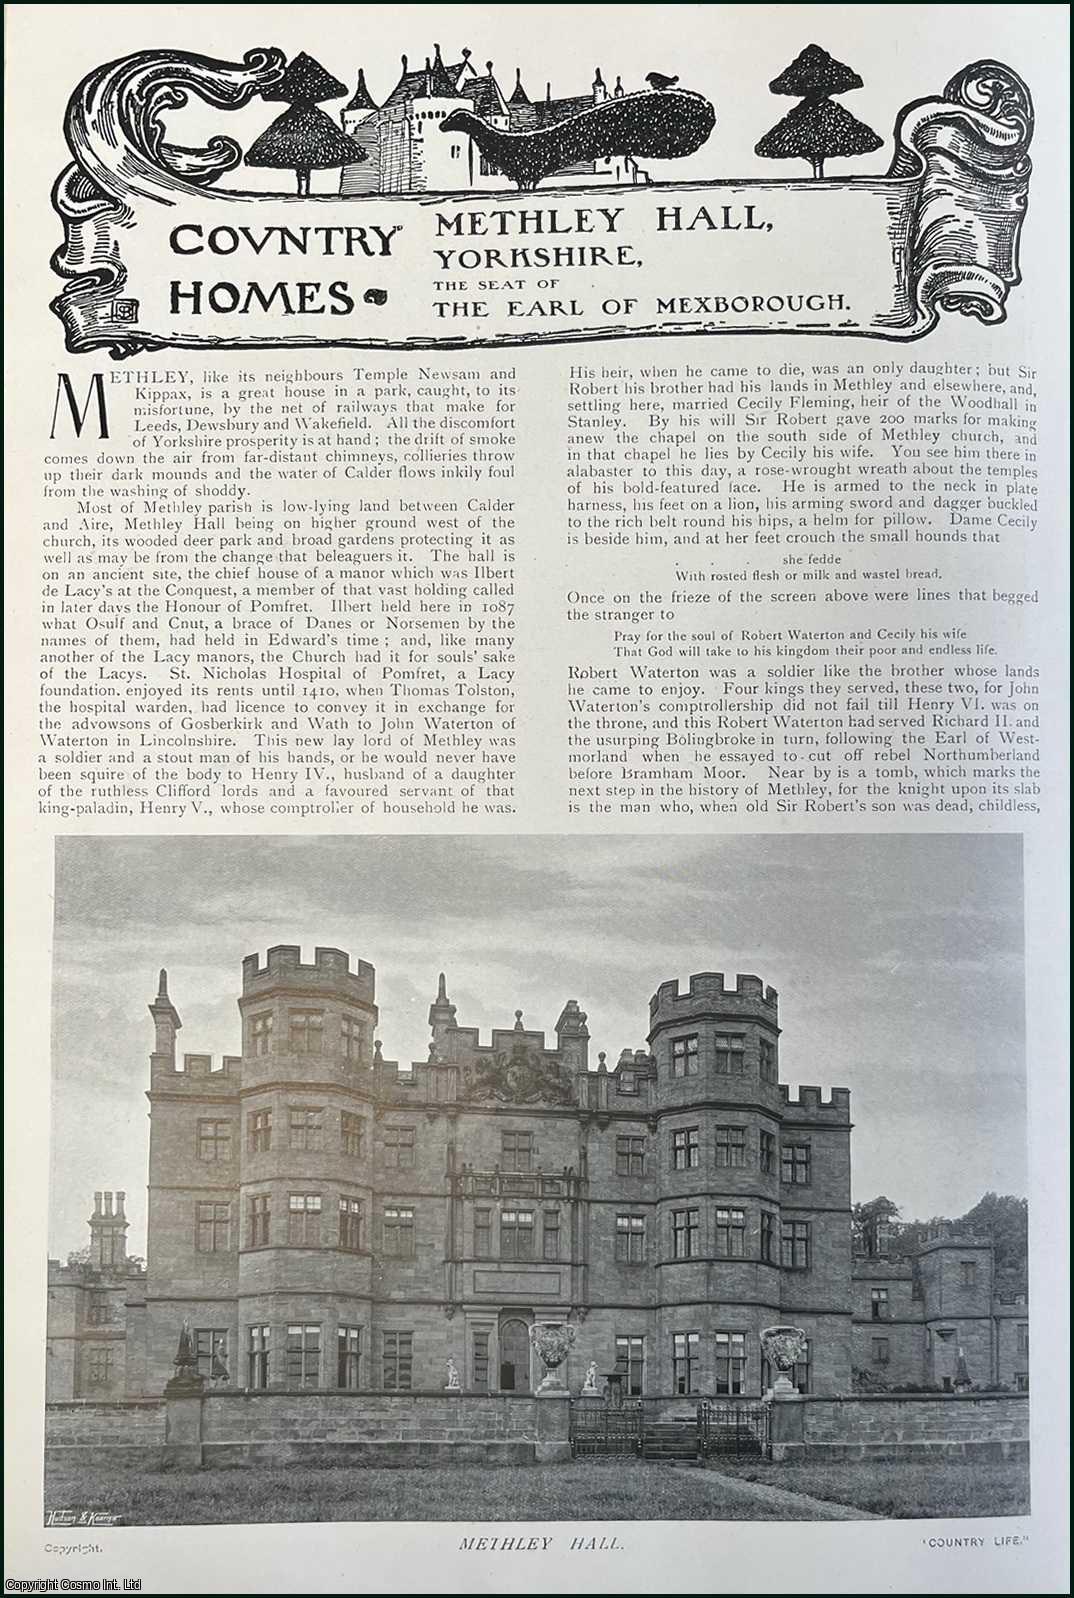 Oswald Barron - Methley Hall, Yorkshire. The Seat of the Earl of Mexborough. Several pictures and accompanying text, removed from an original issue of Country Life Magazine, 1907.